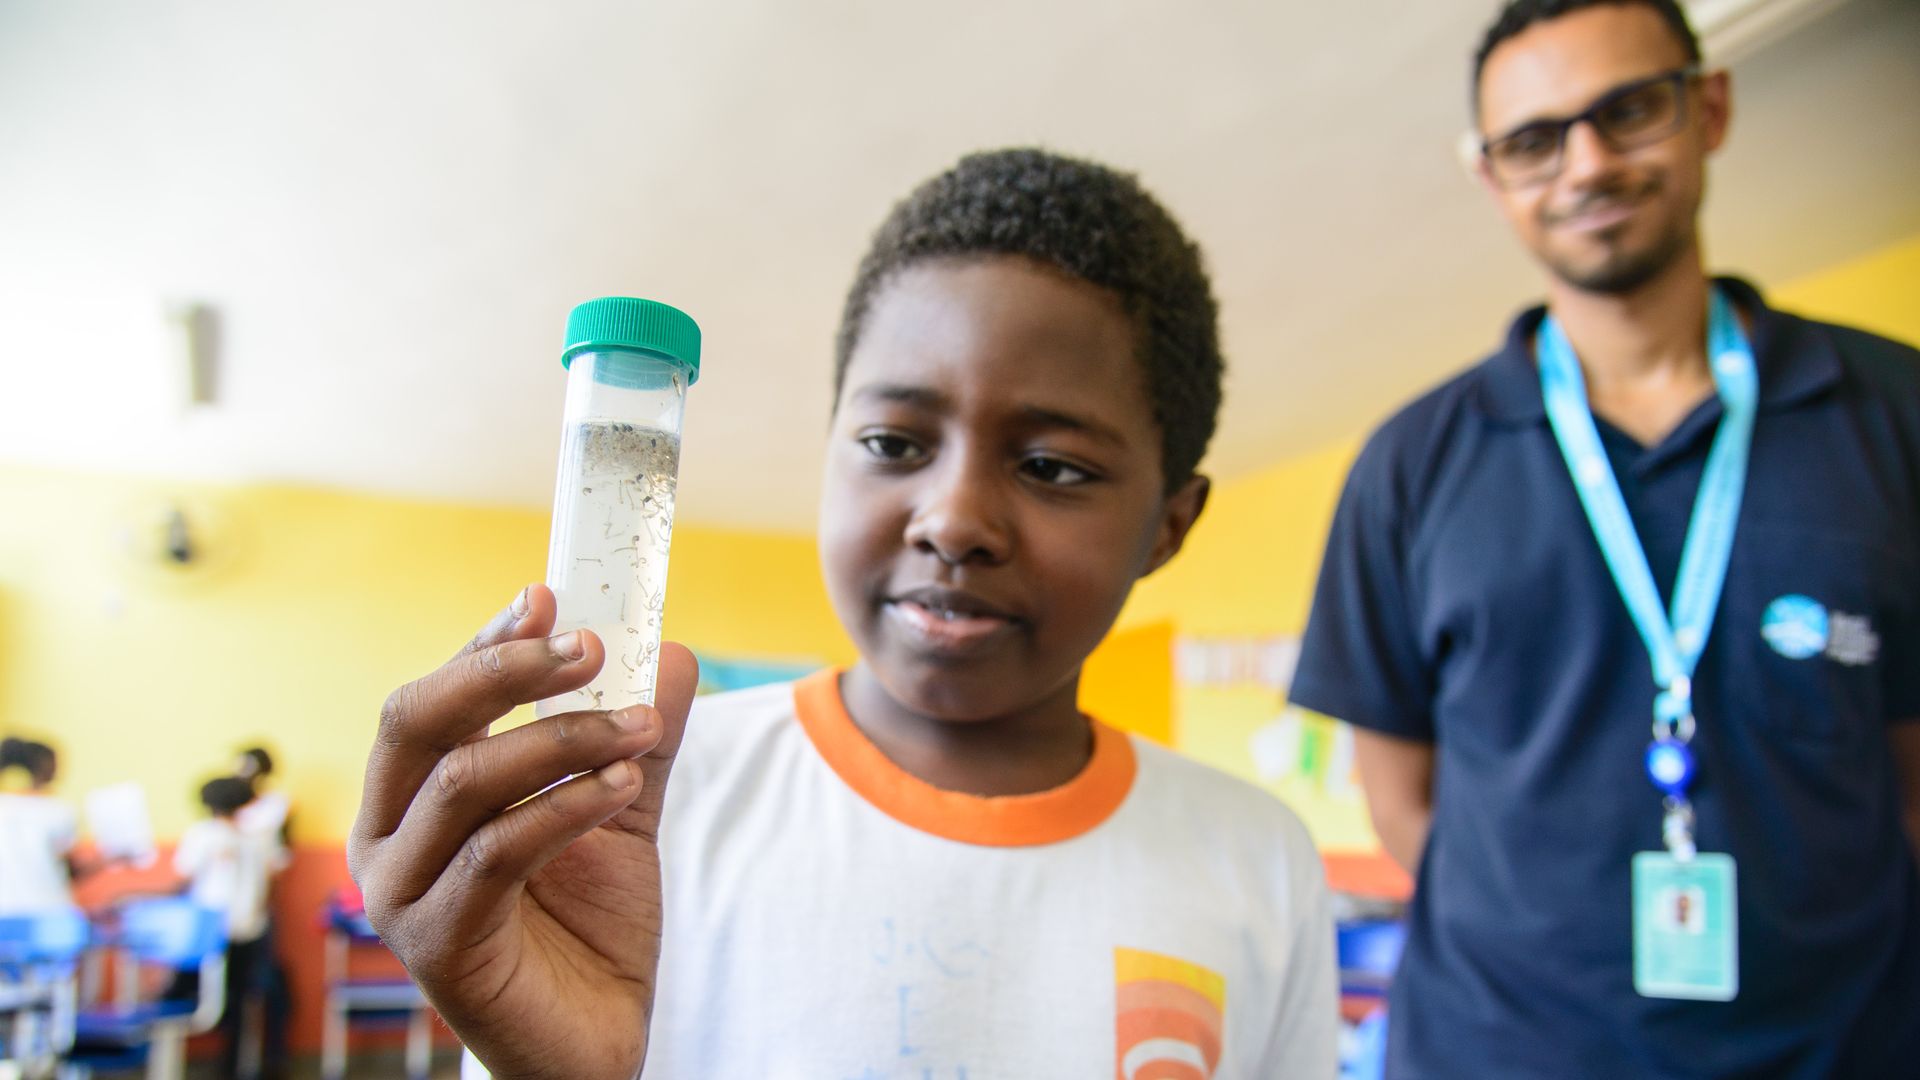 A young boy holds up a tube with mosquitos in it. A person with a lanyard stands behind him. 